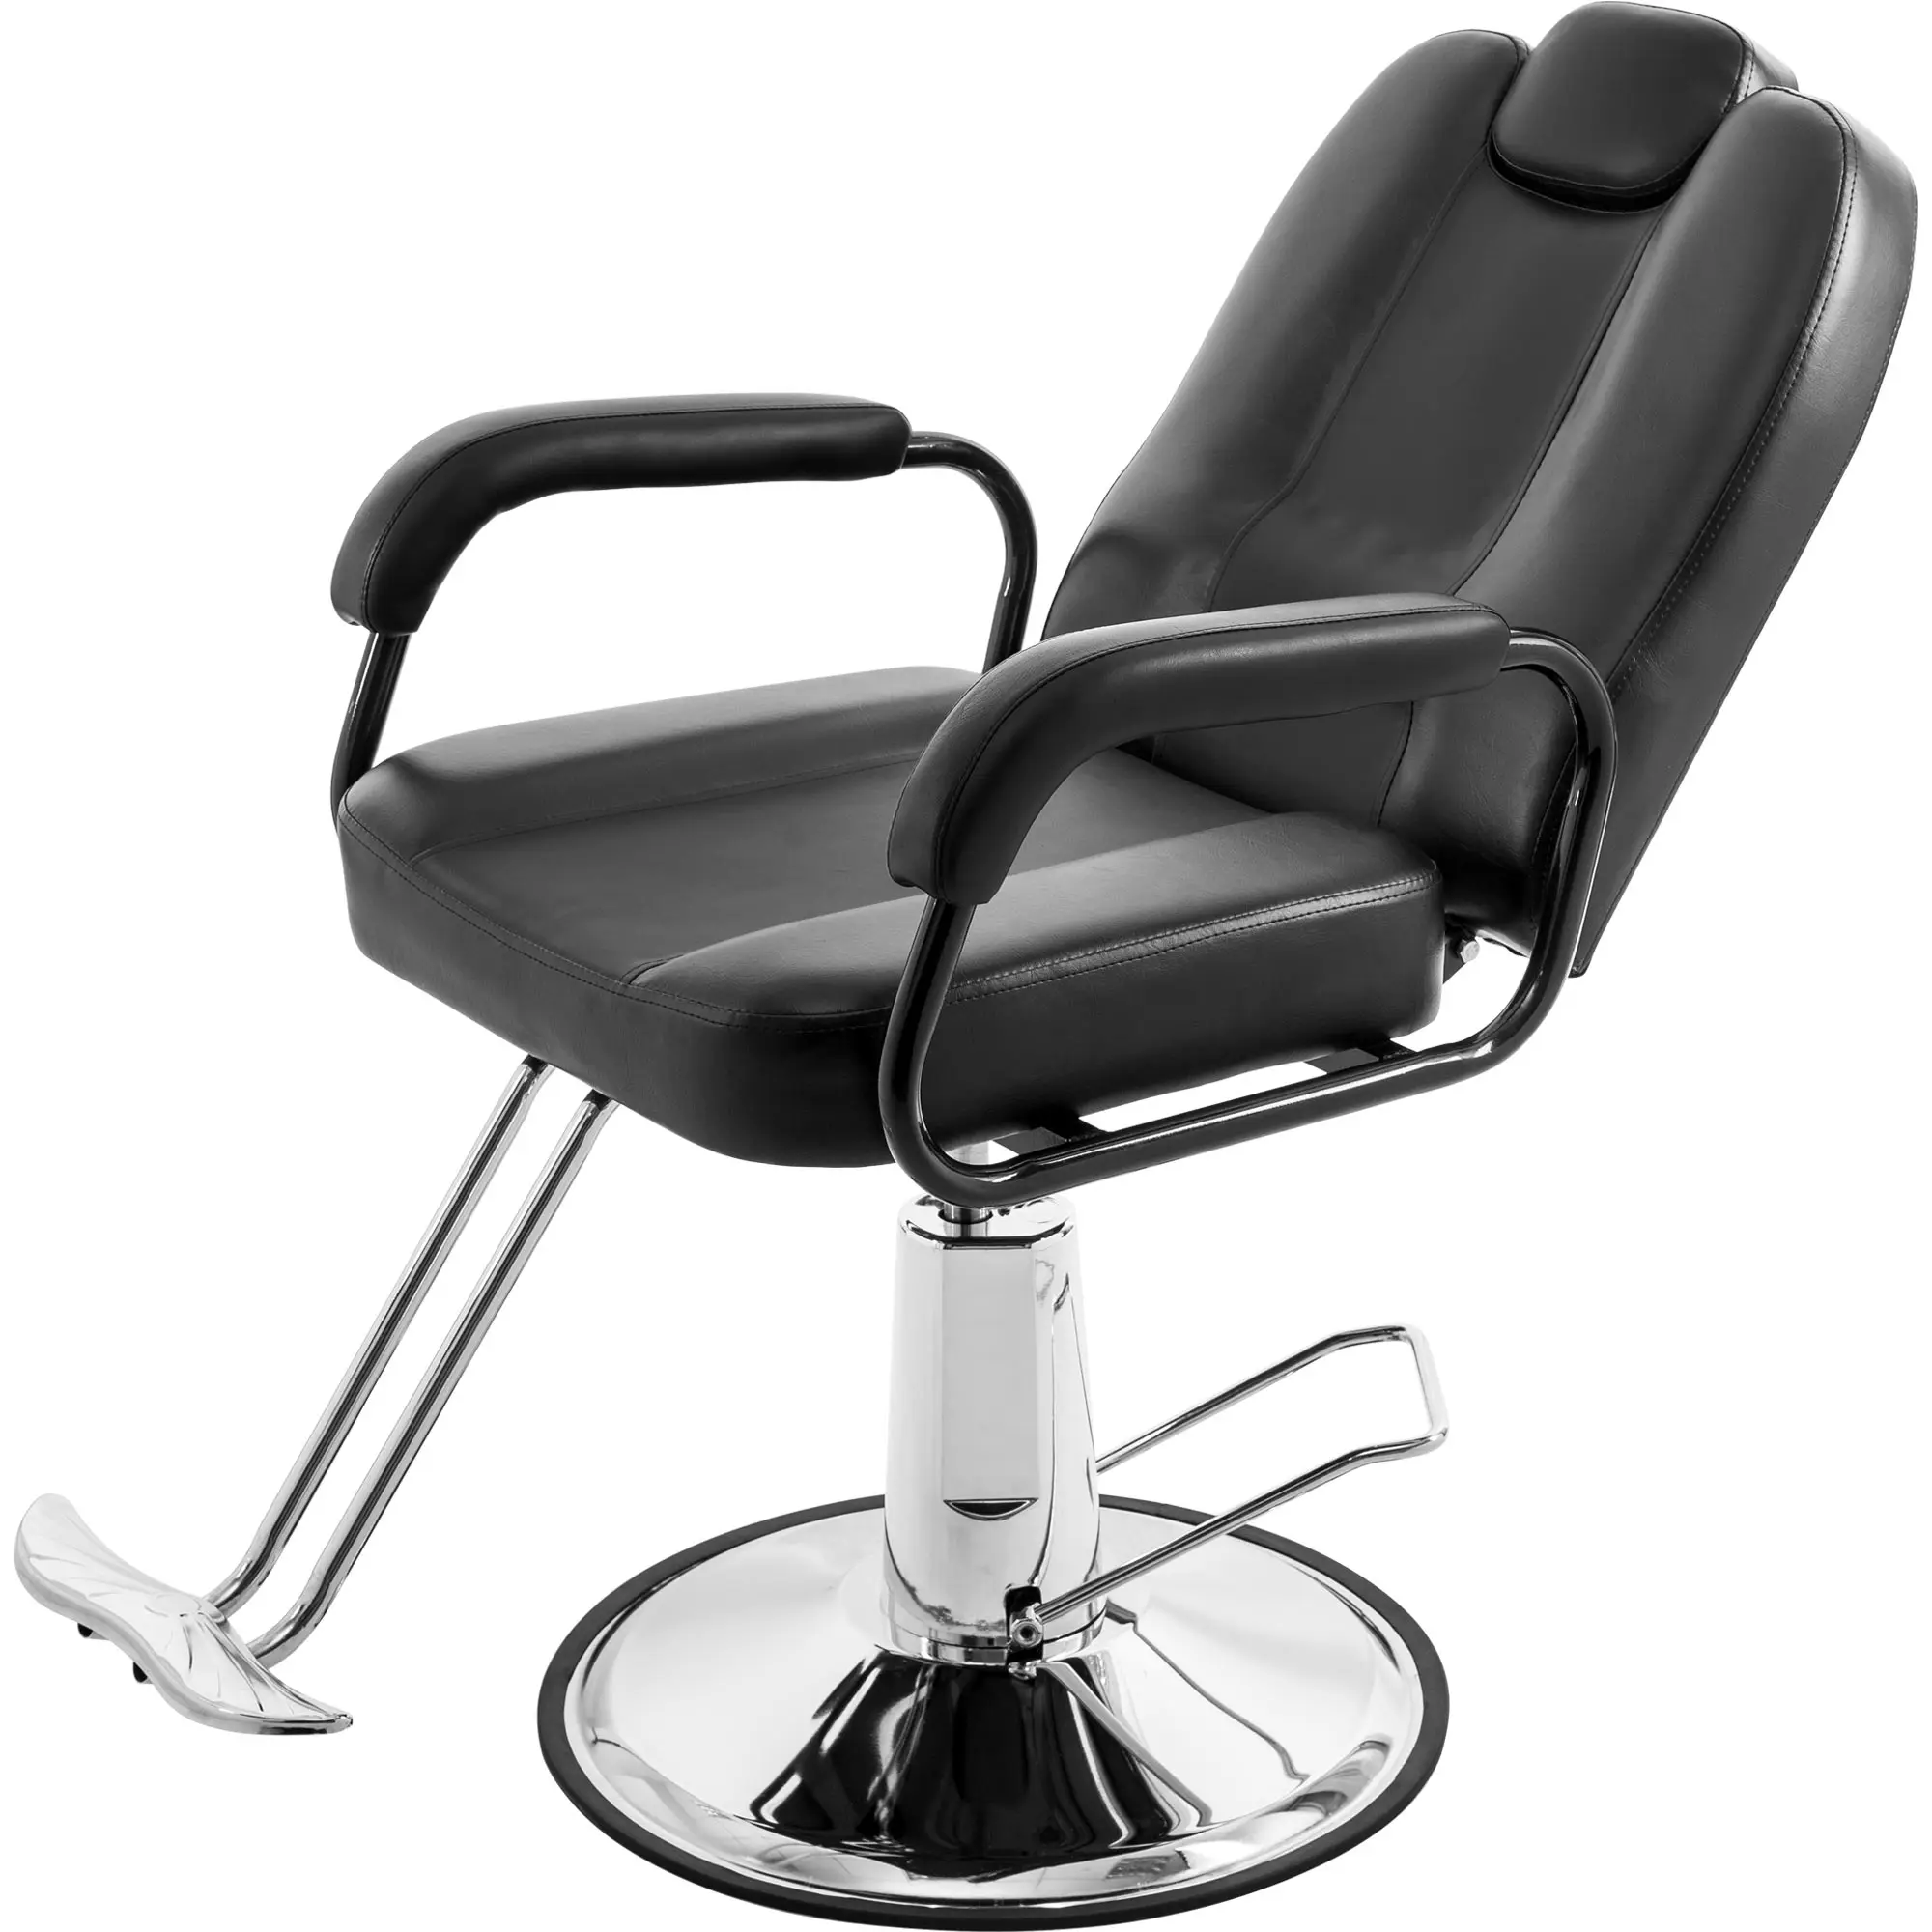 Deluxe Reclining Barber Chair with Heavy-Duty Pump for Beauty Salon Tatoo Spa Equipment Black/Red[US-Stock]